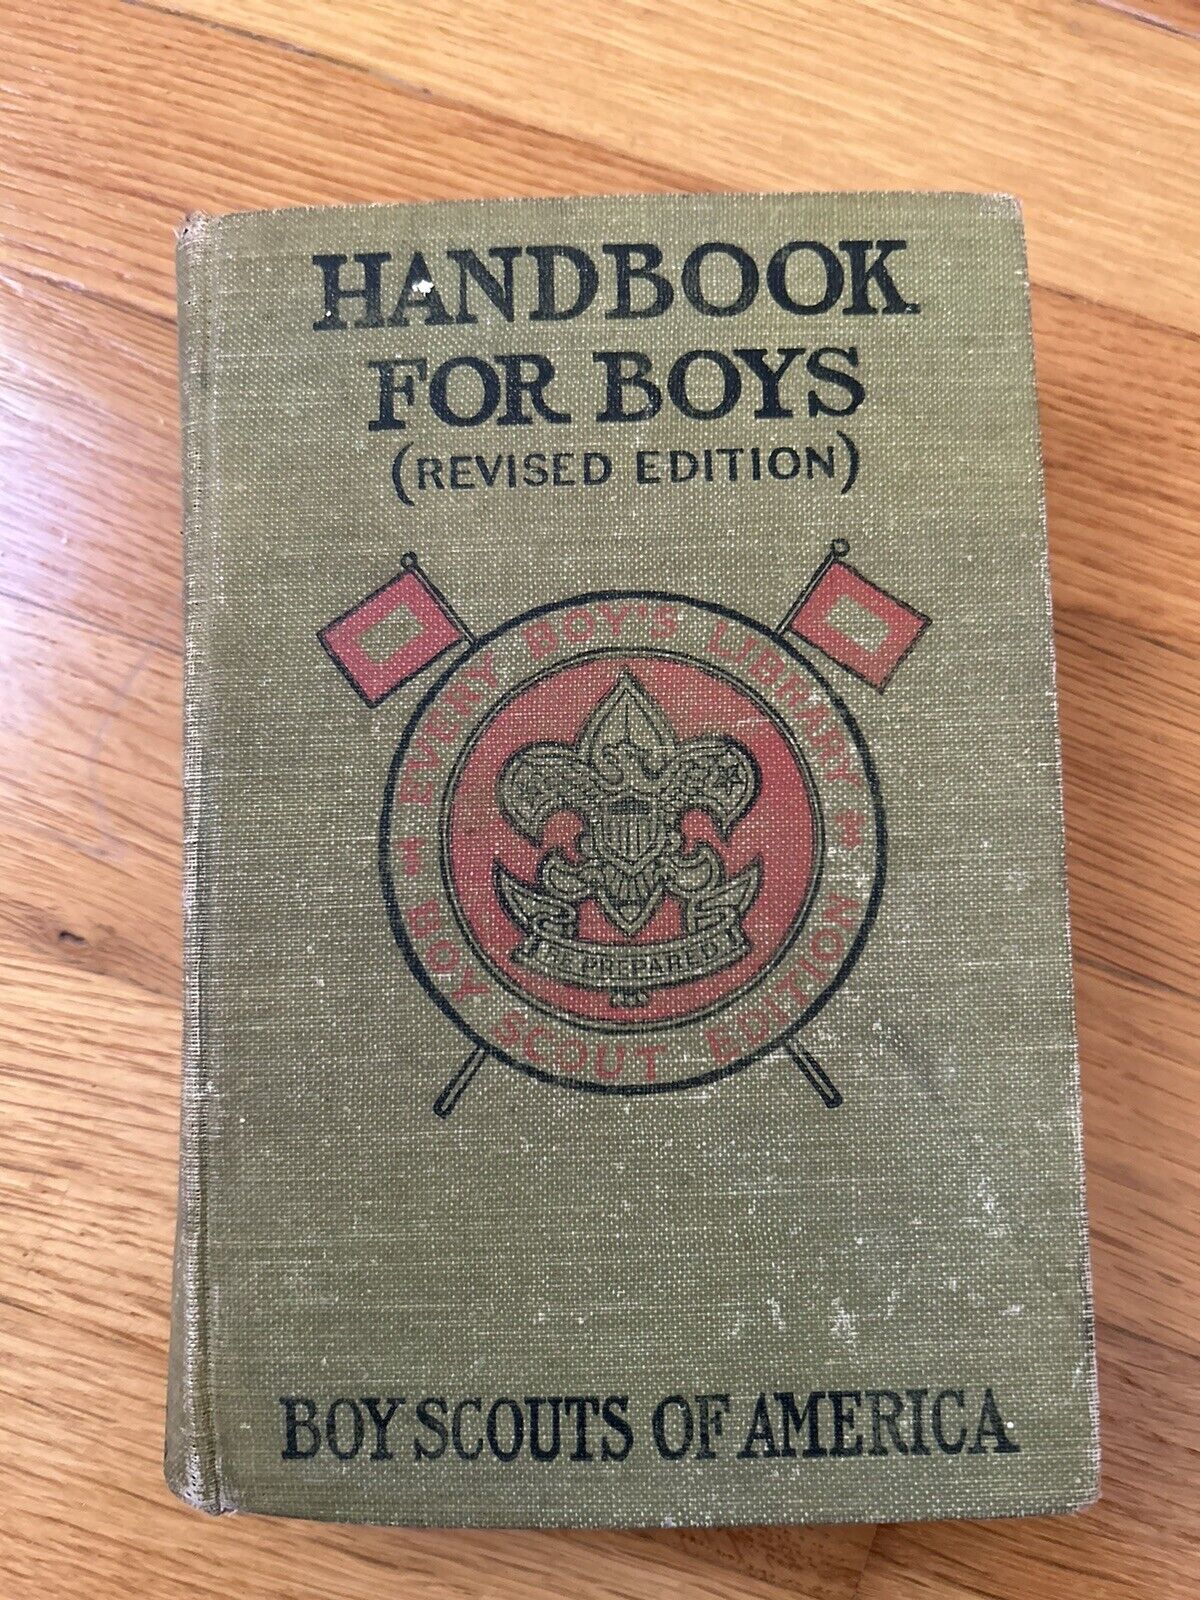 Handbook for Boys, Revised Edition. Grosset and Dunlap, 1921